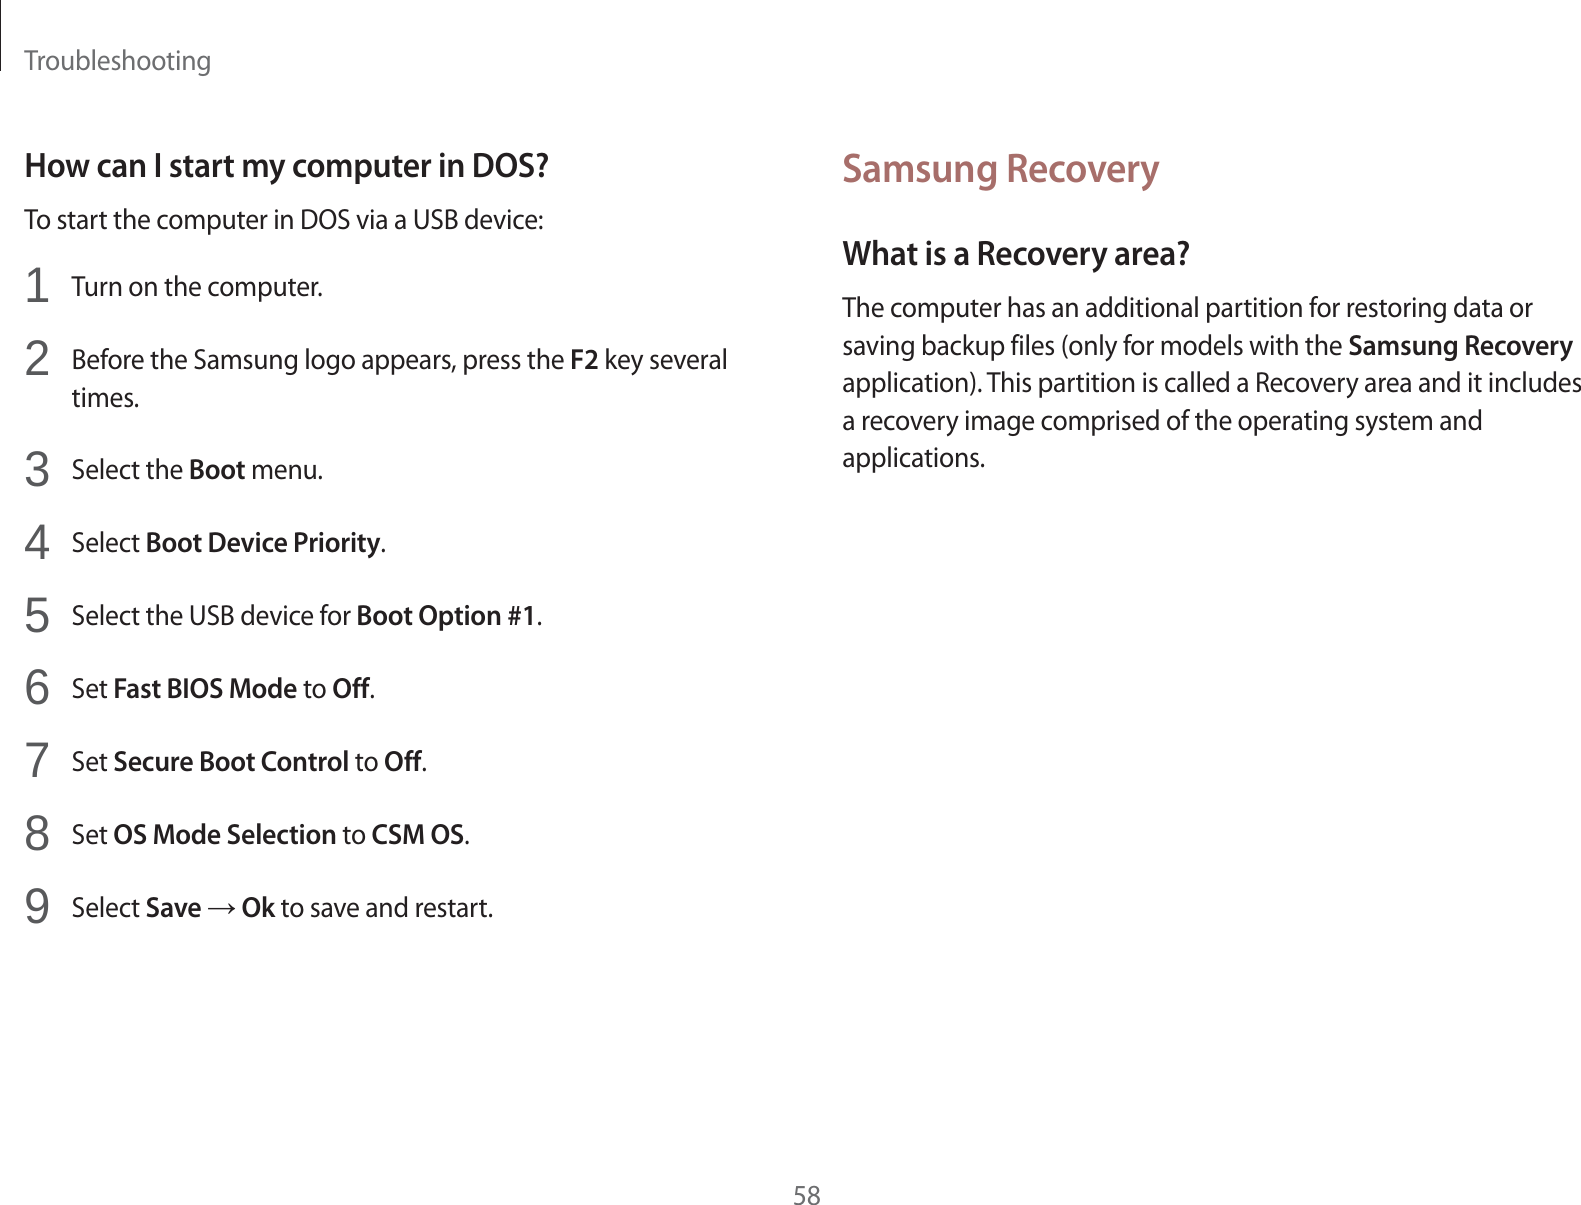 Troubleshooting58Samsung RecoveryWhat is a Recovery area?The computer has an additional partition for restoring data or saving backup files (only for models with the Samsung Recovery application). This partition is called a Recovery area and it includes a recovery image comprised of the operating system and applications.How can I start my computer in DOS?To start the computer in DOS via a USB device:1Turn on the computer.2Before the Samsung logo appears, press the F2 key several times.3Select the Boot menu.4Select Boot Device Priority.5Select the USB device for Boot Option #1.6Set Fast BIOS Mode to Off.7Set Secure Boot Control to Off.8Set OS Mode Selection to CSM OS.9Select Save ĺ Ok to save and restart.